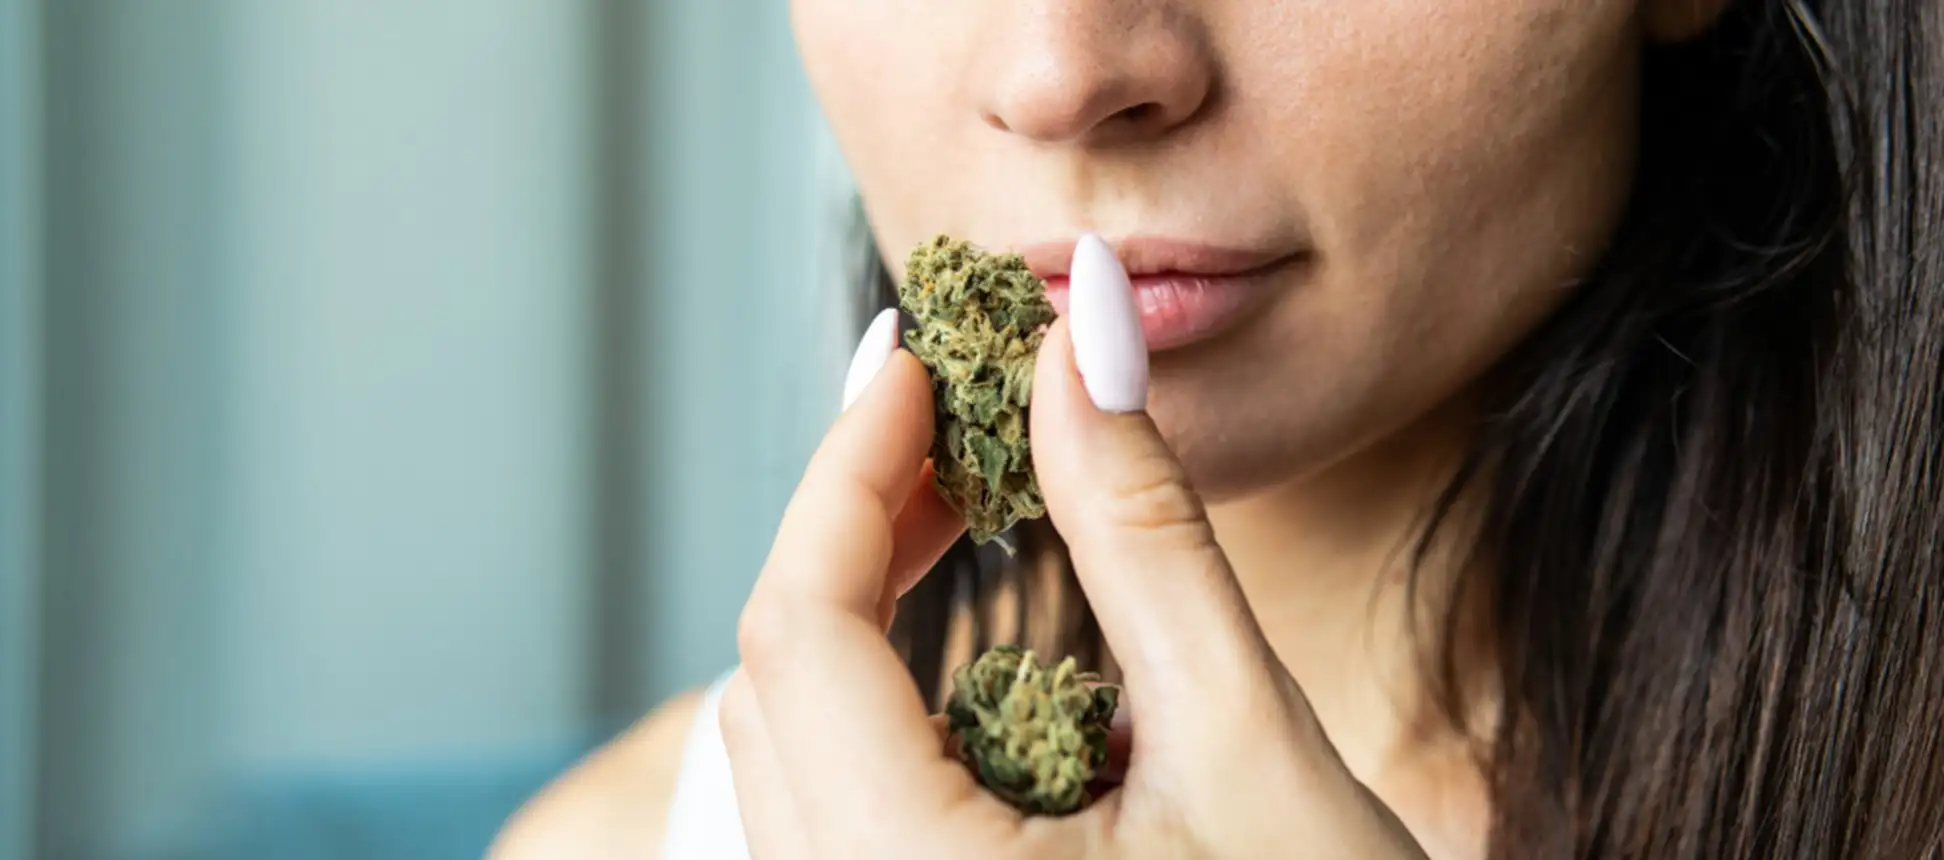 Woman smelling cannabis buds